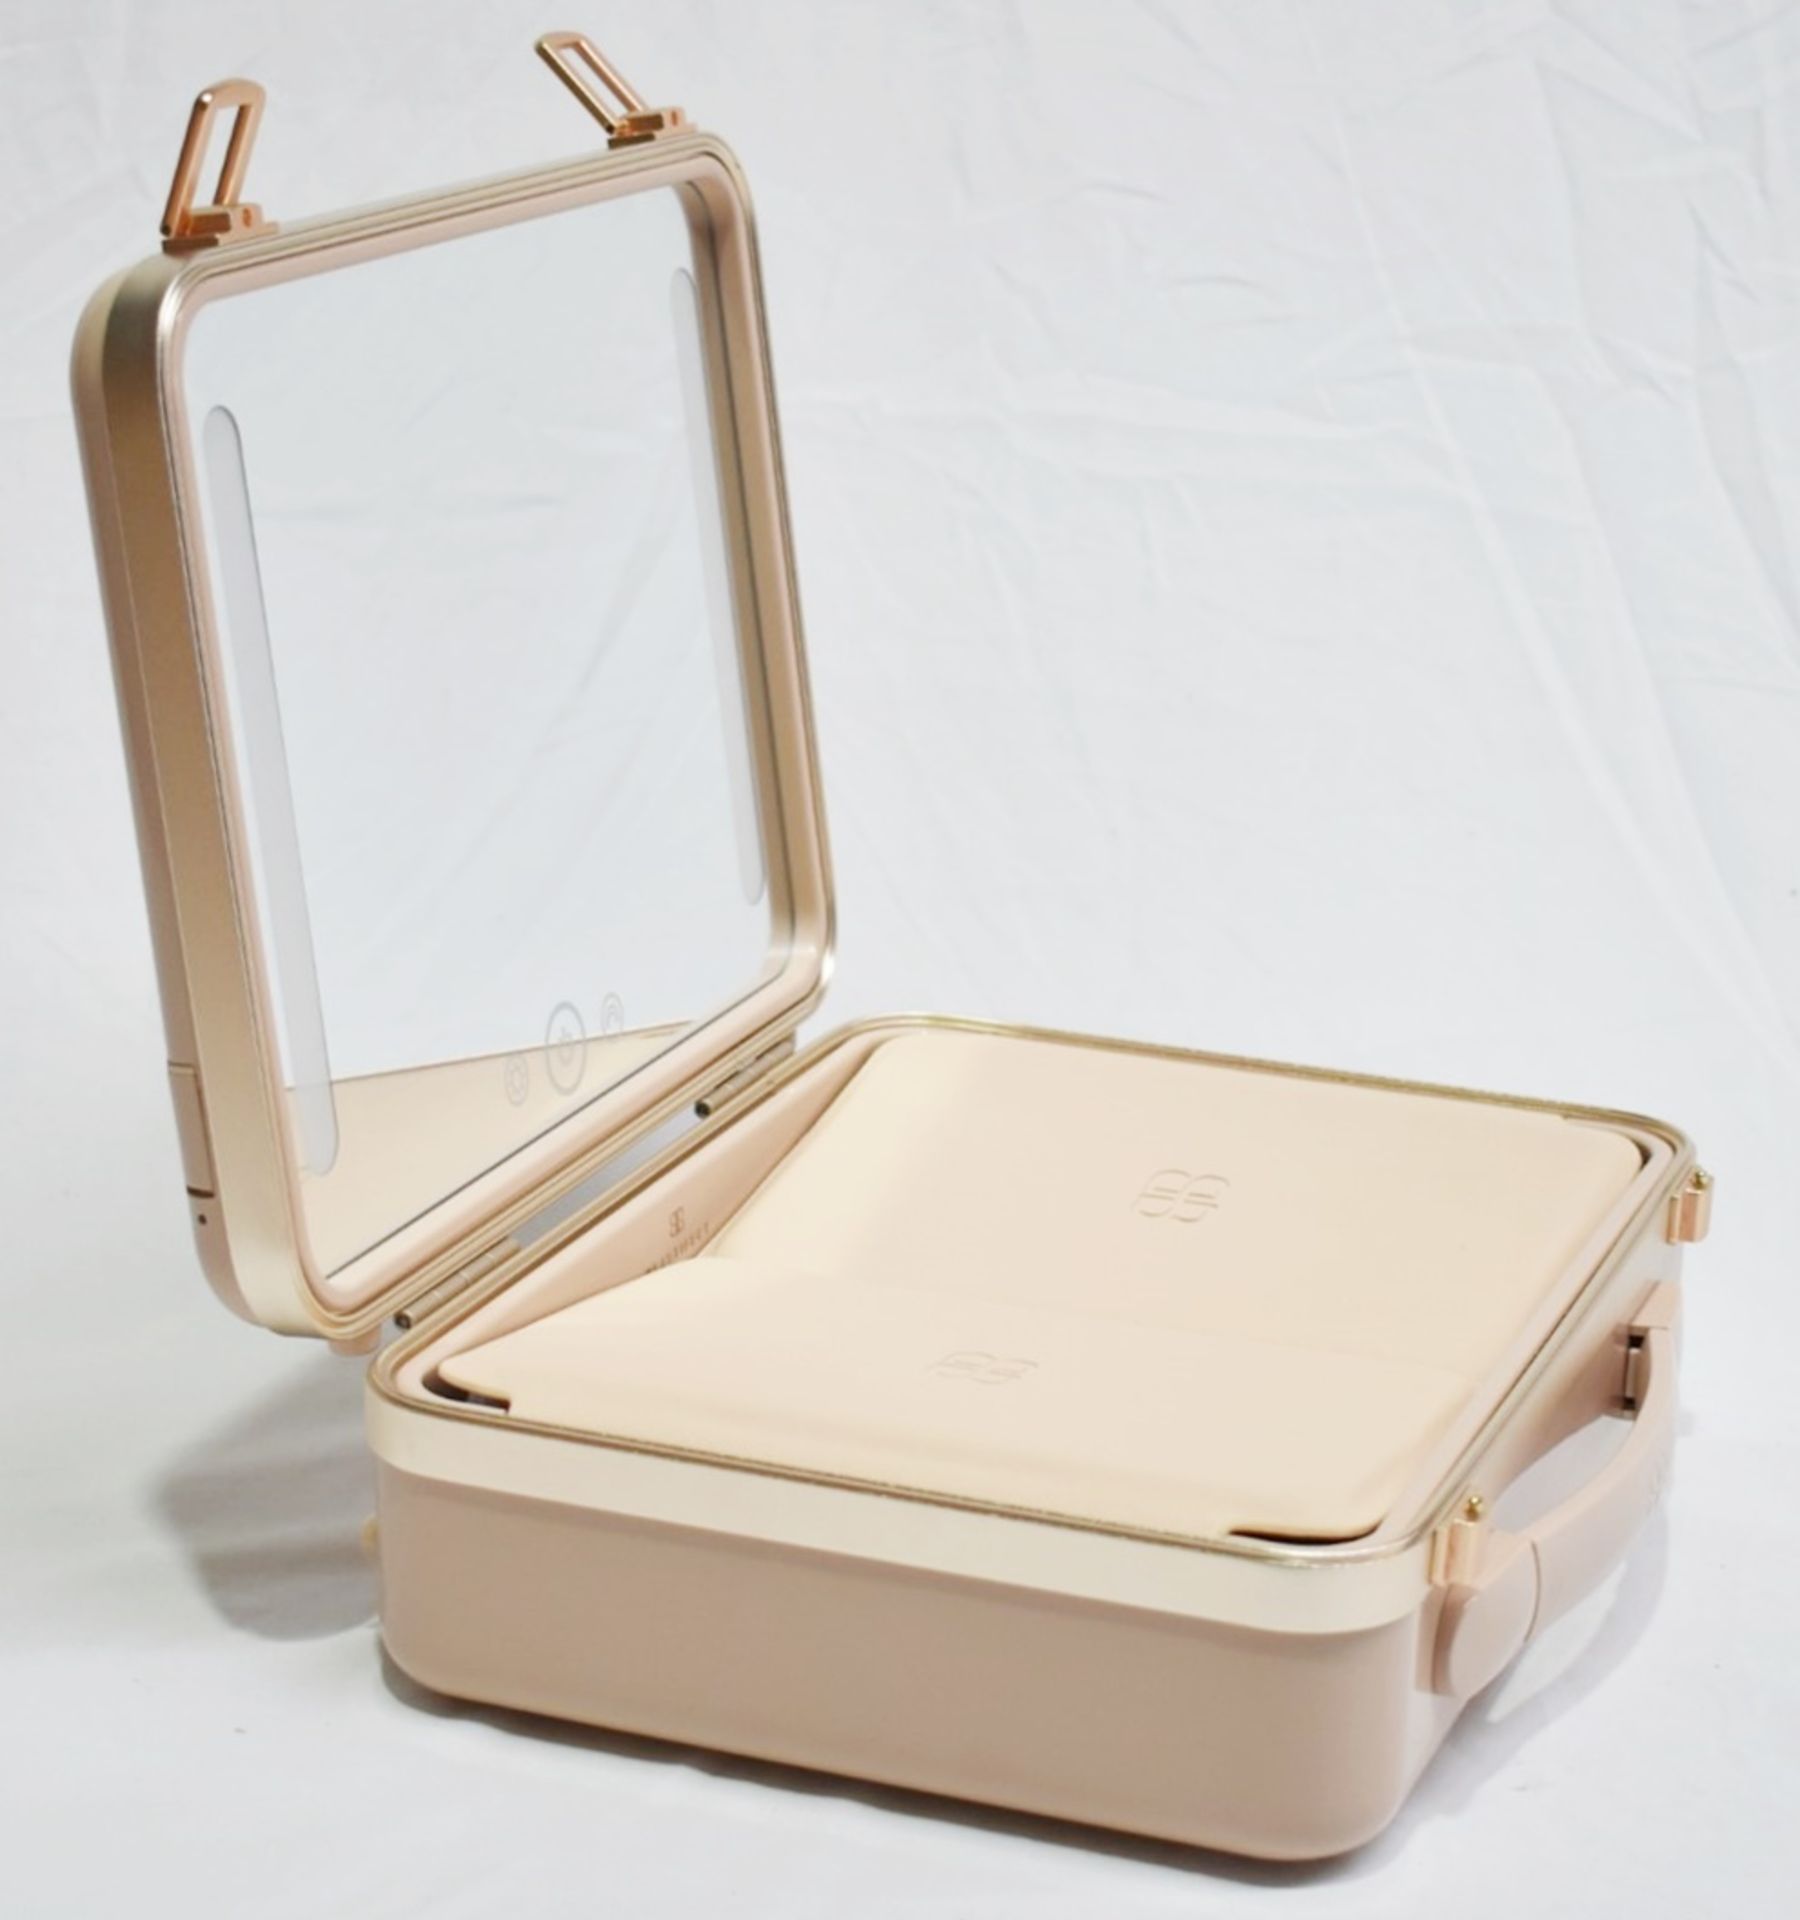 1 x BEAUTIFECT 'Beautifect Box' Make-Up Carry Case With Built-in Illuminated Mirror - RRP £279.00 - Image 3 of 12